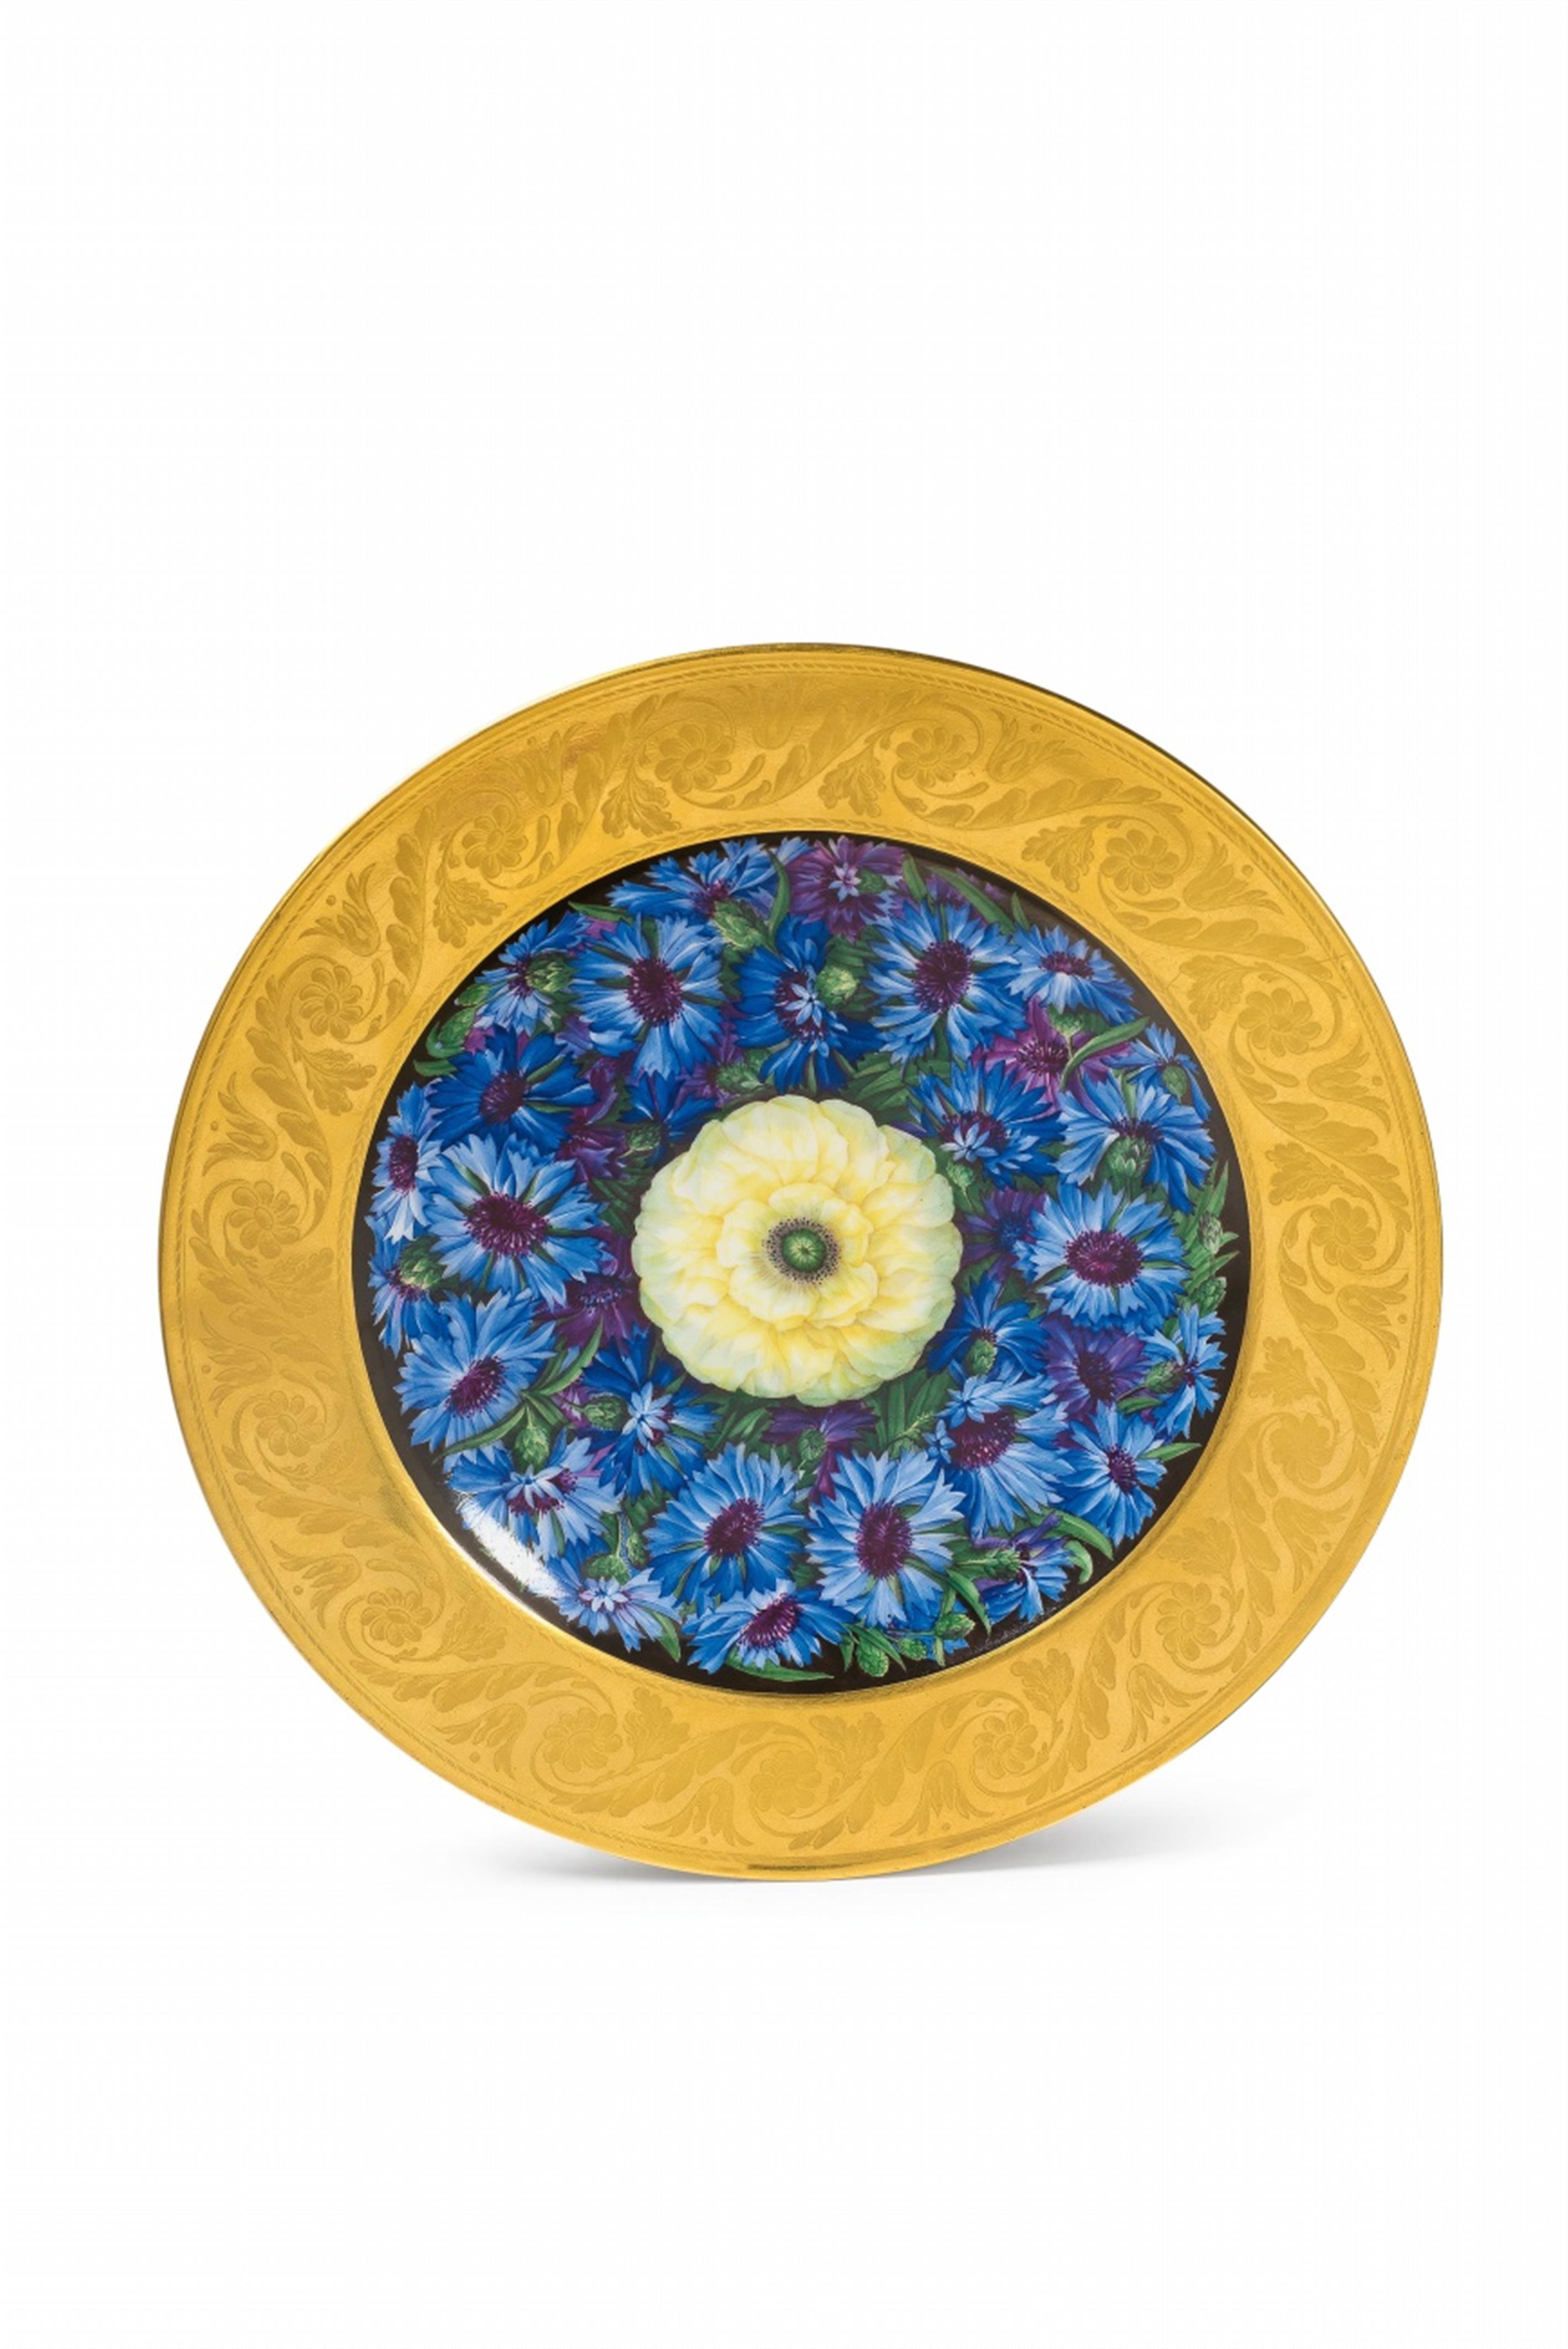 A Berlin KPM porcelain plate with cornflowers and ranunculus - image-1